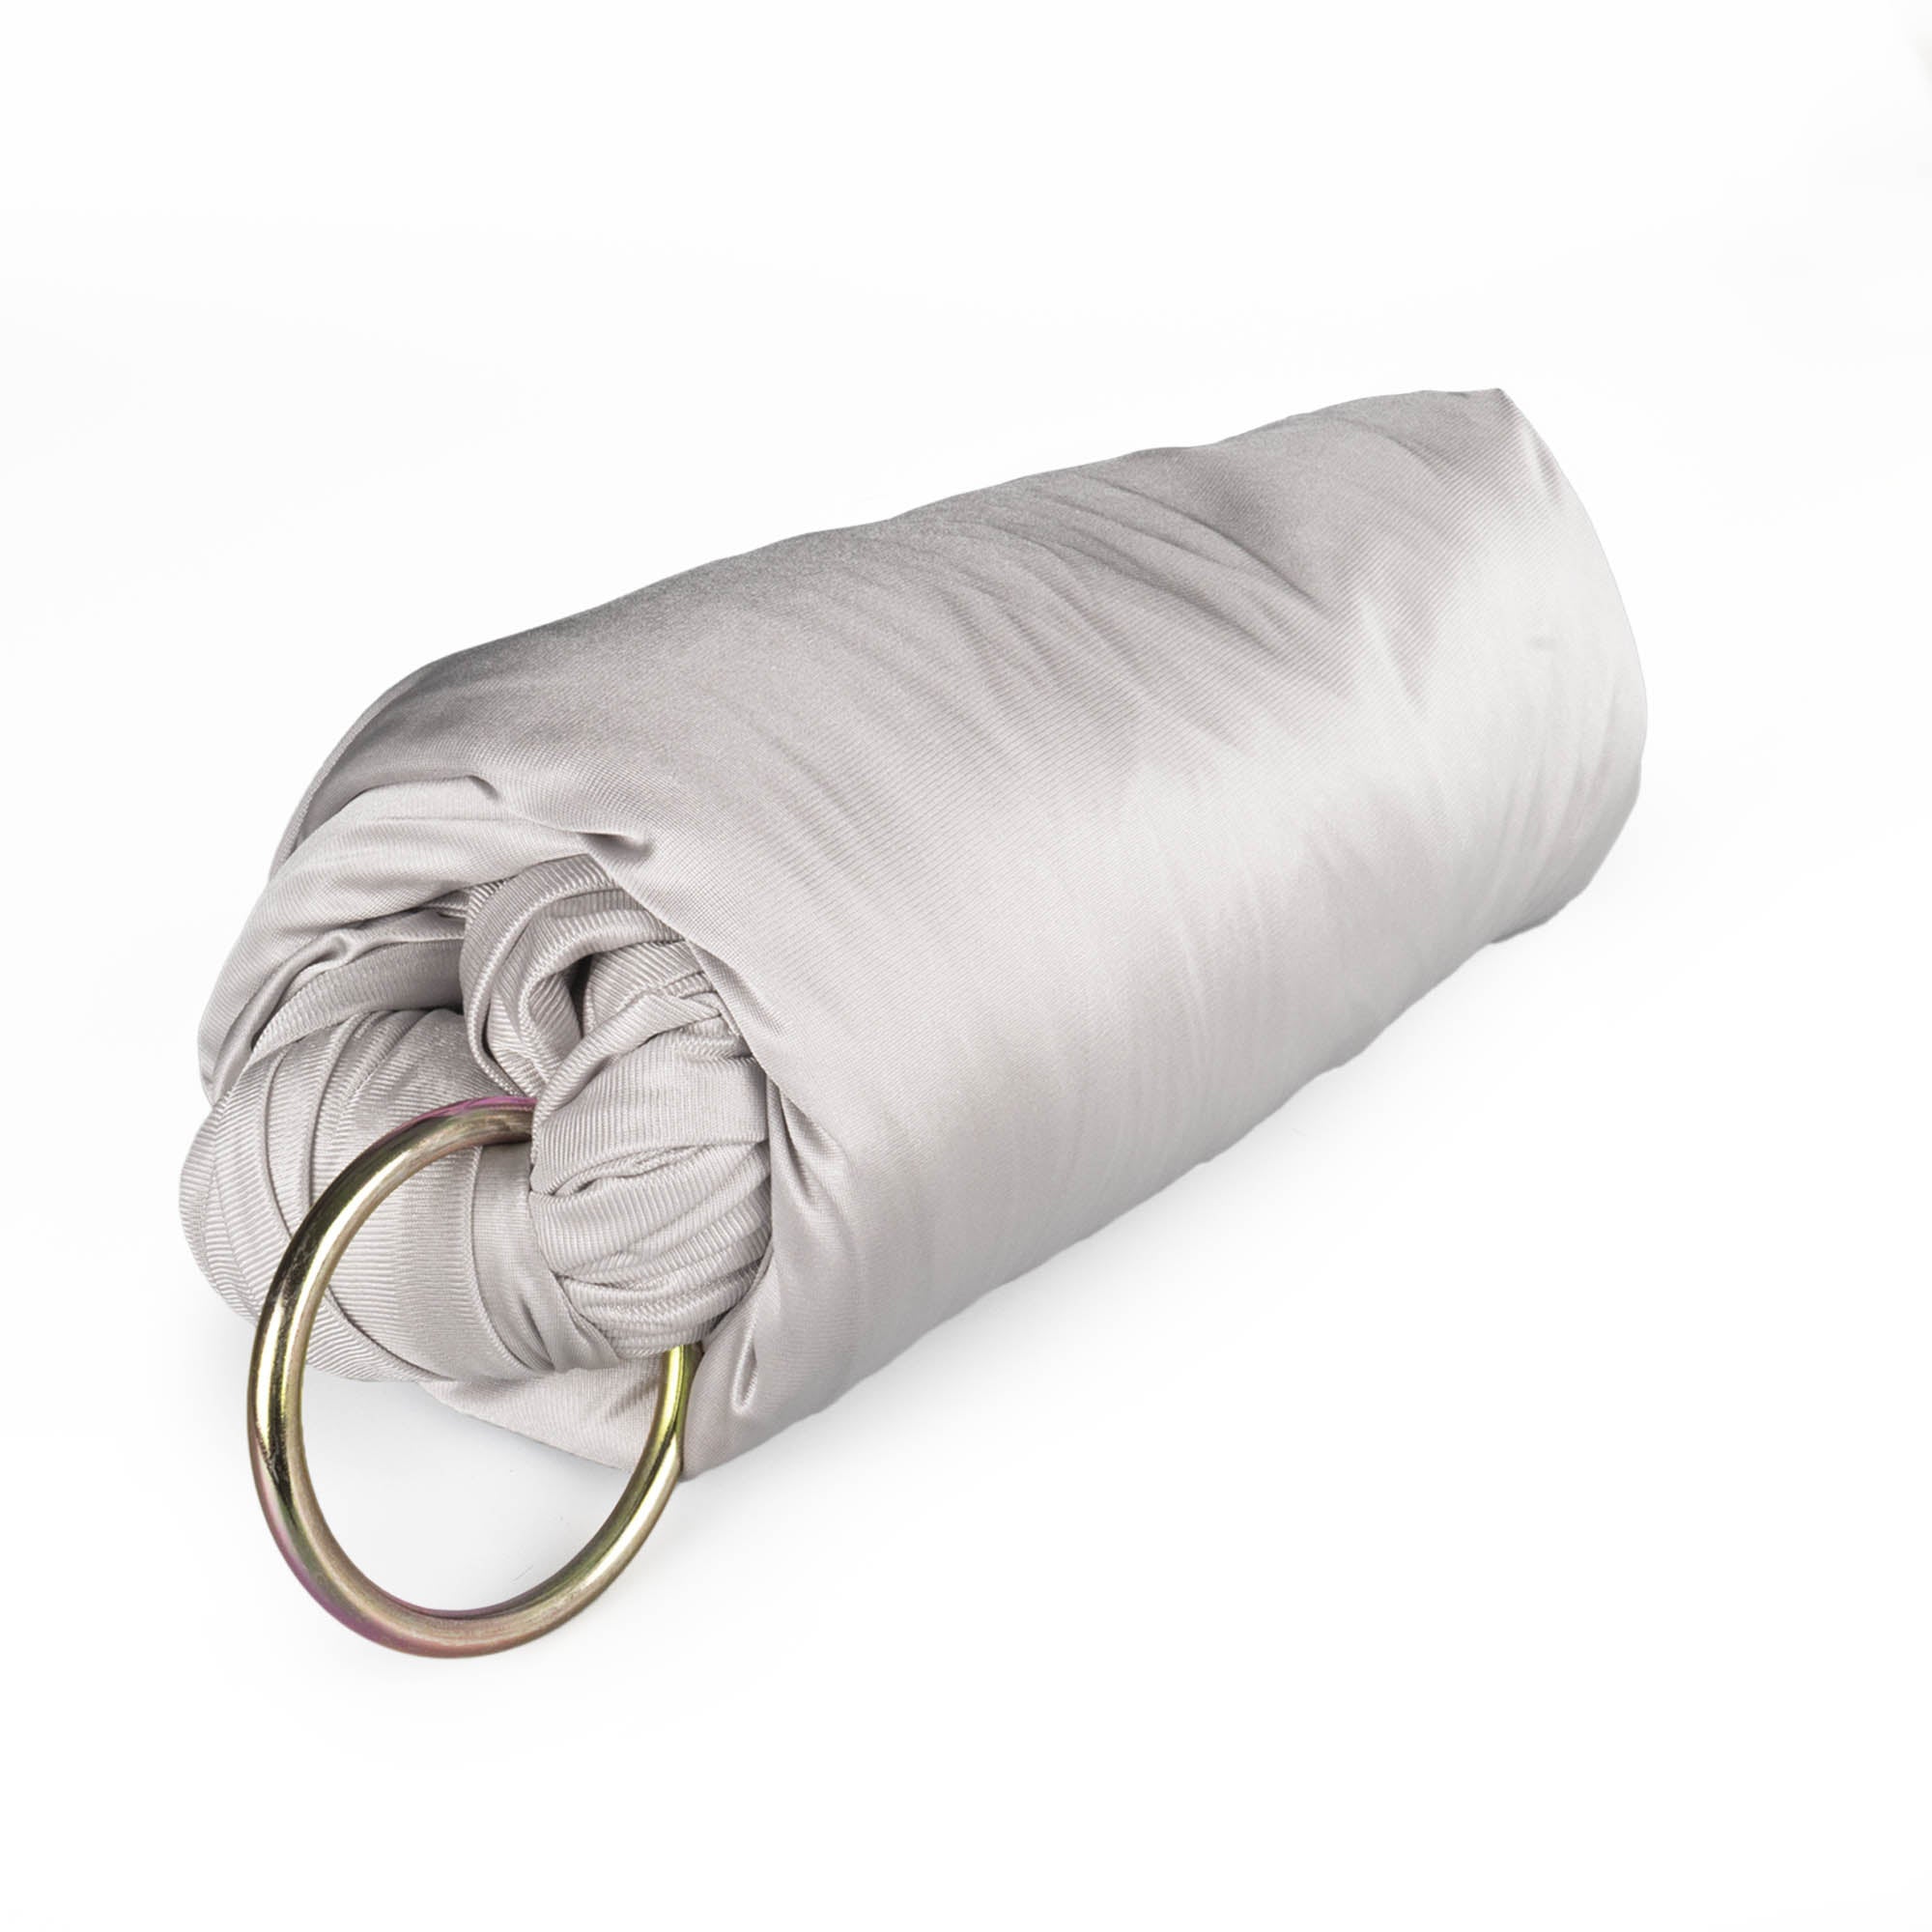 Silver yoga hammock with O rings attached